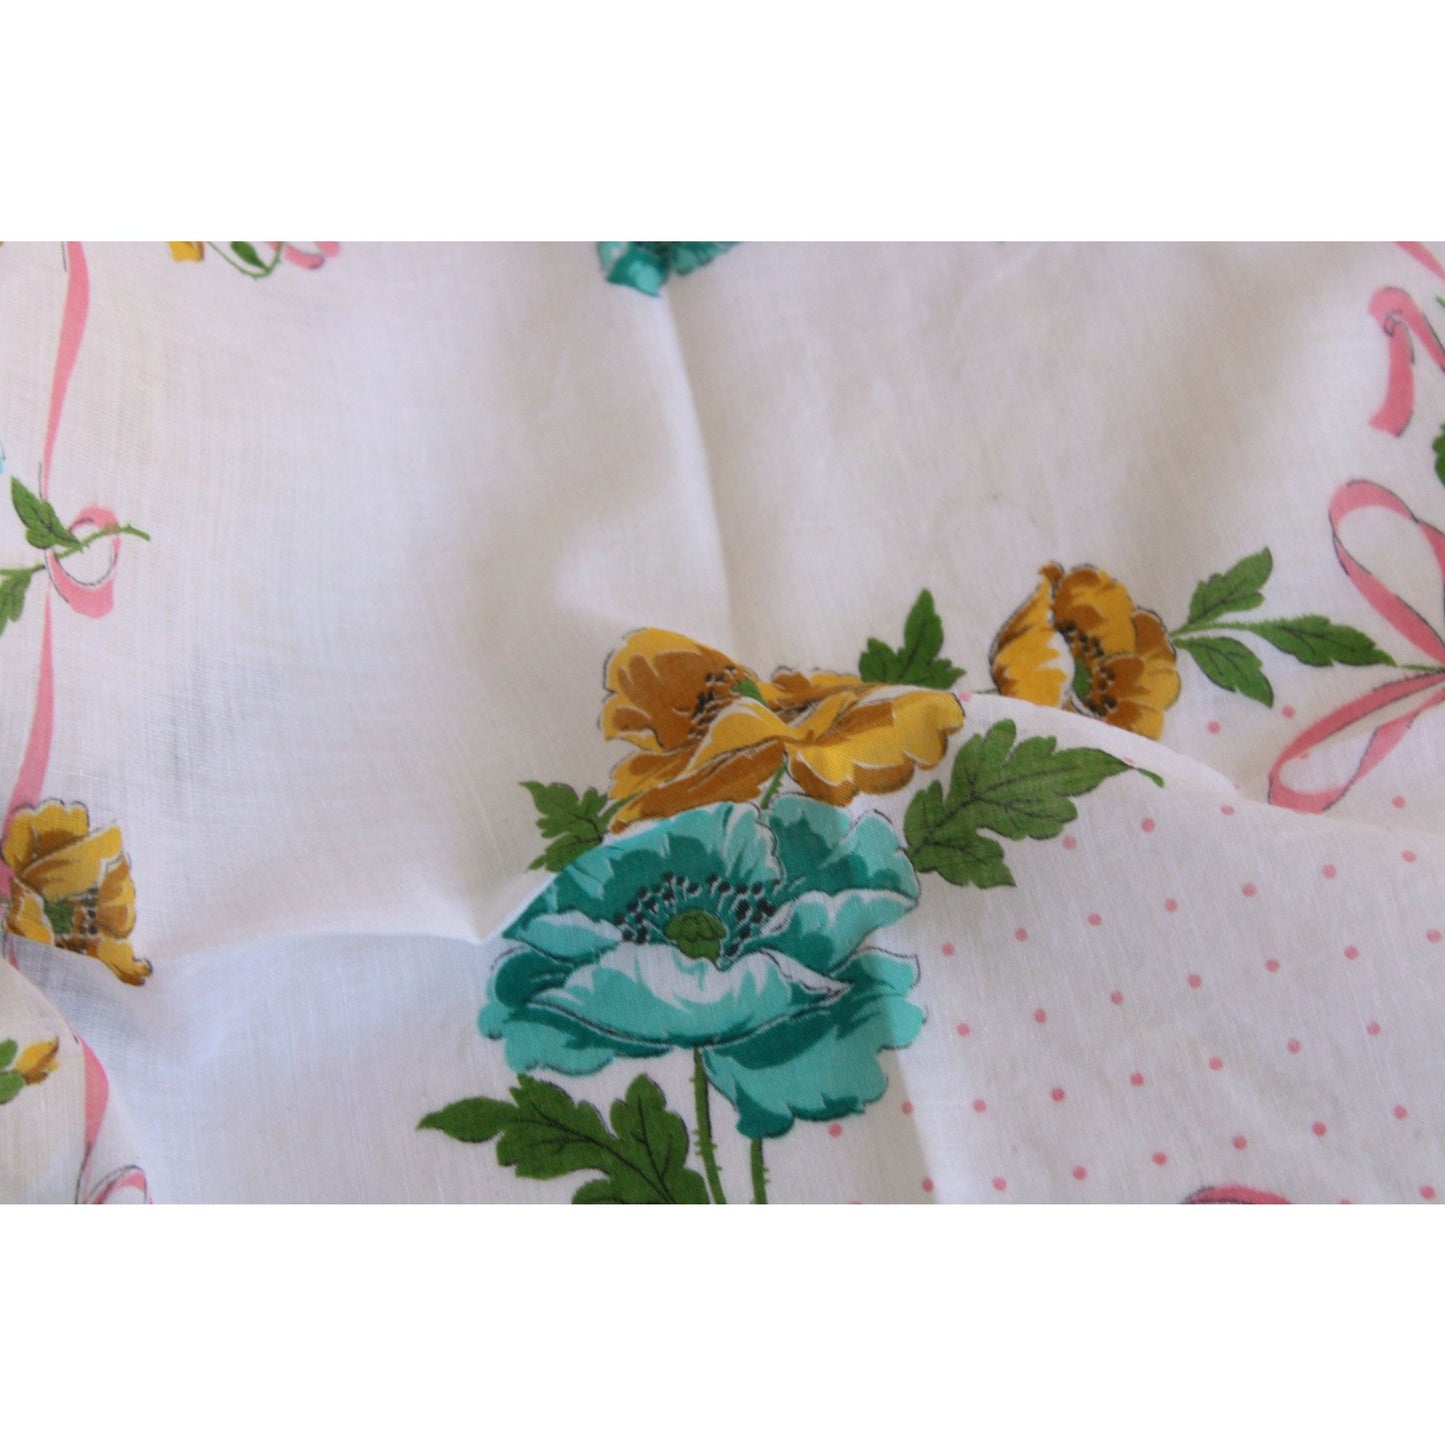 Vintage 1950s Cotton Teal and Yellow Flowers Hanky